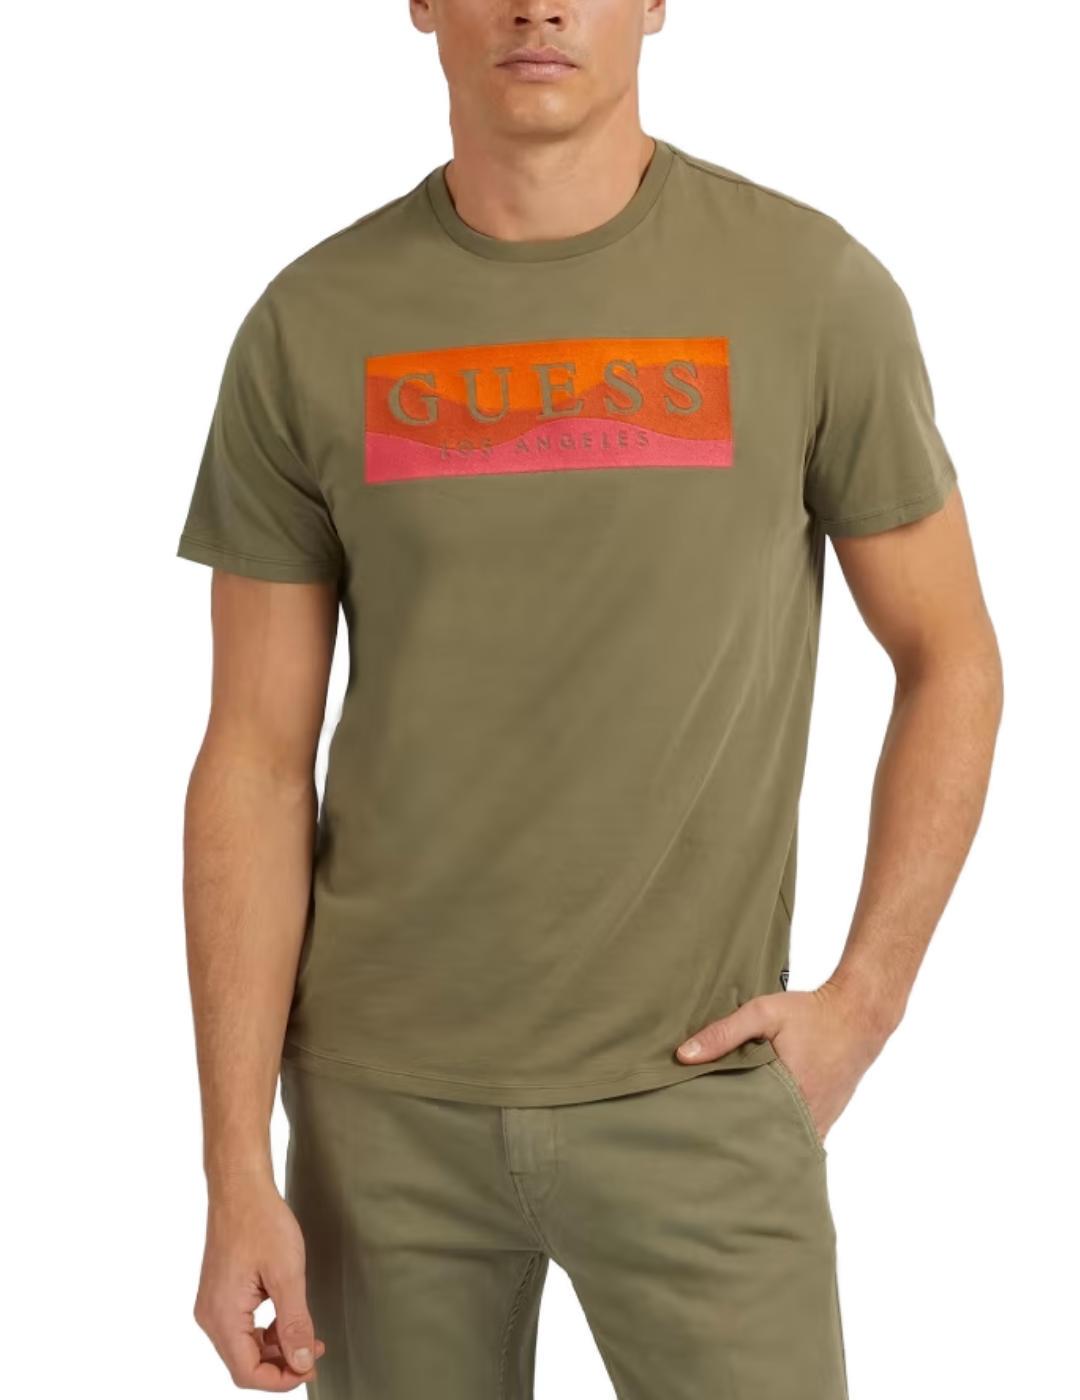 Camiseta Guess Embroidered verde corta hombre